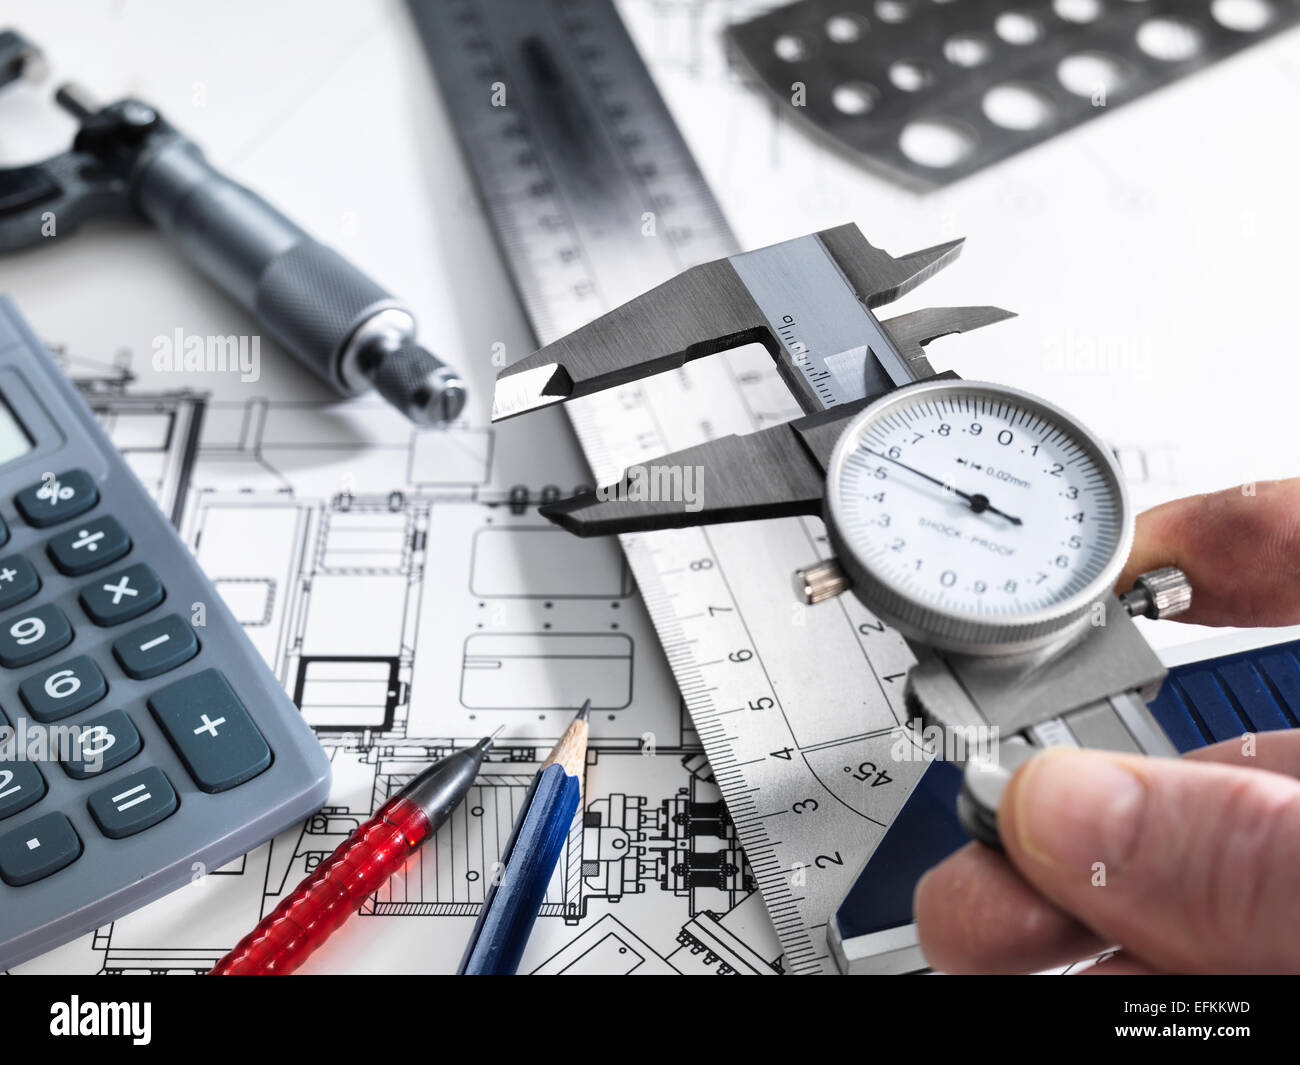 Engineer holding dial caliper with measurement equipment sitting on  technical drawing Stock Photo